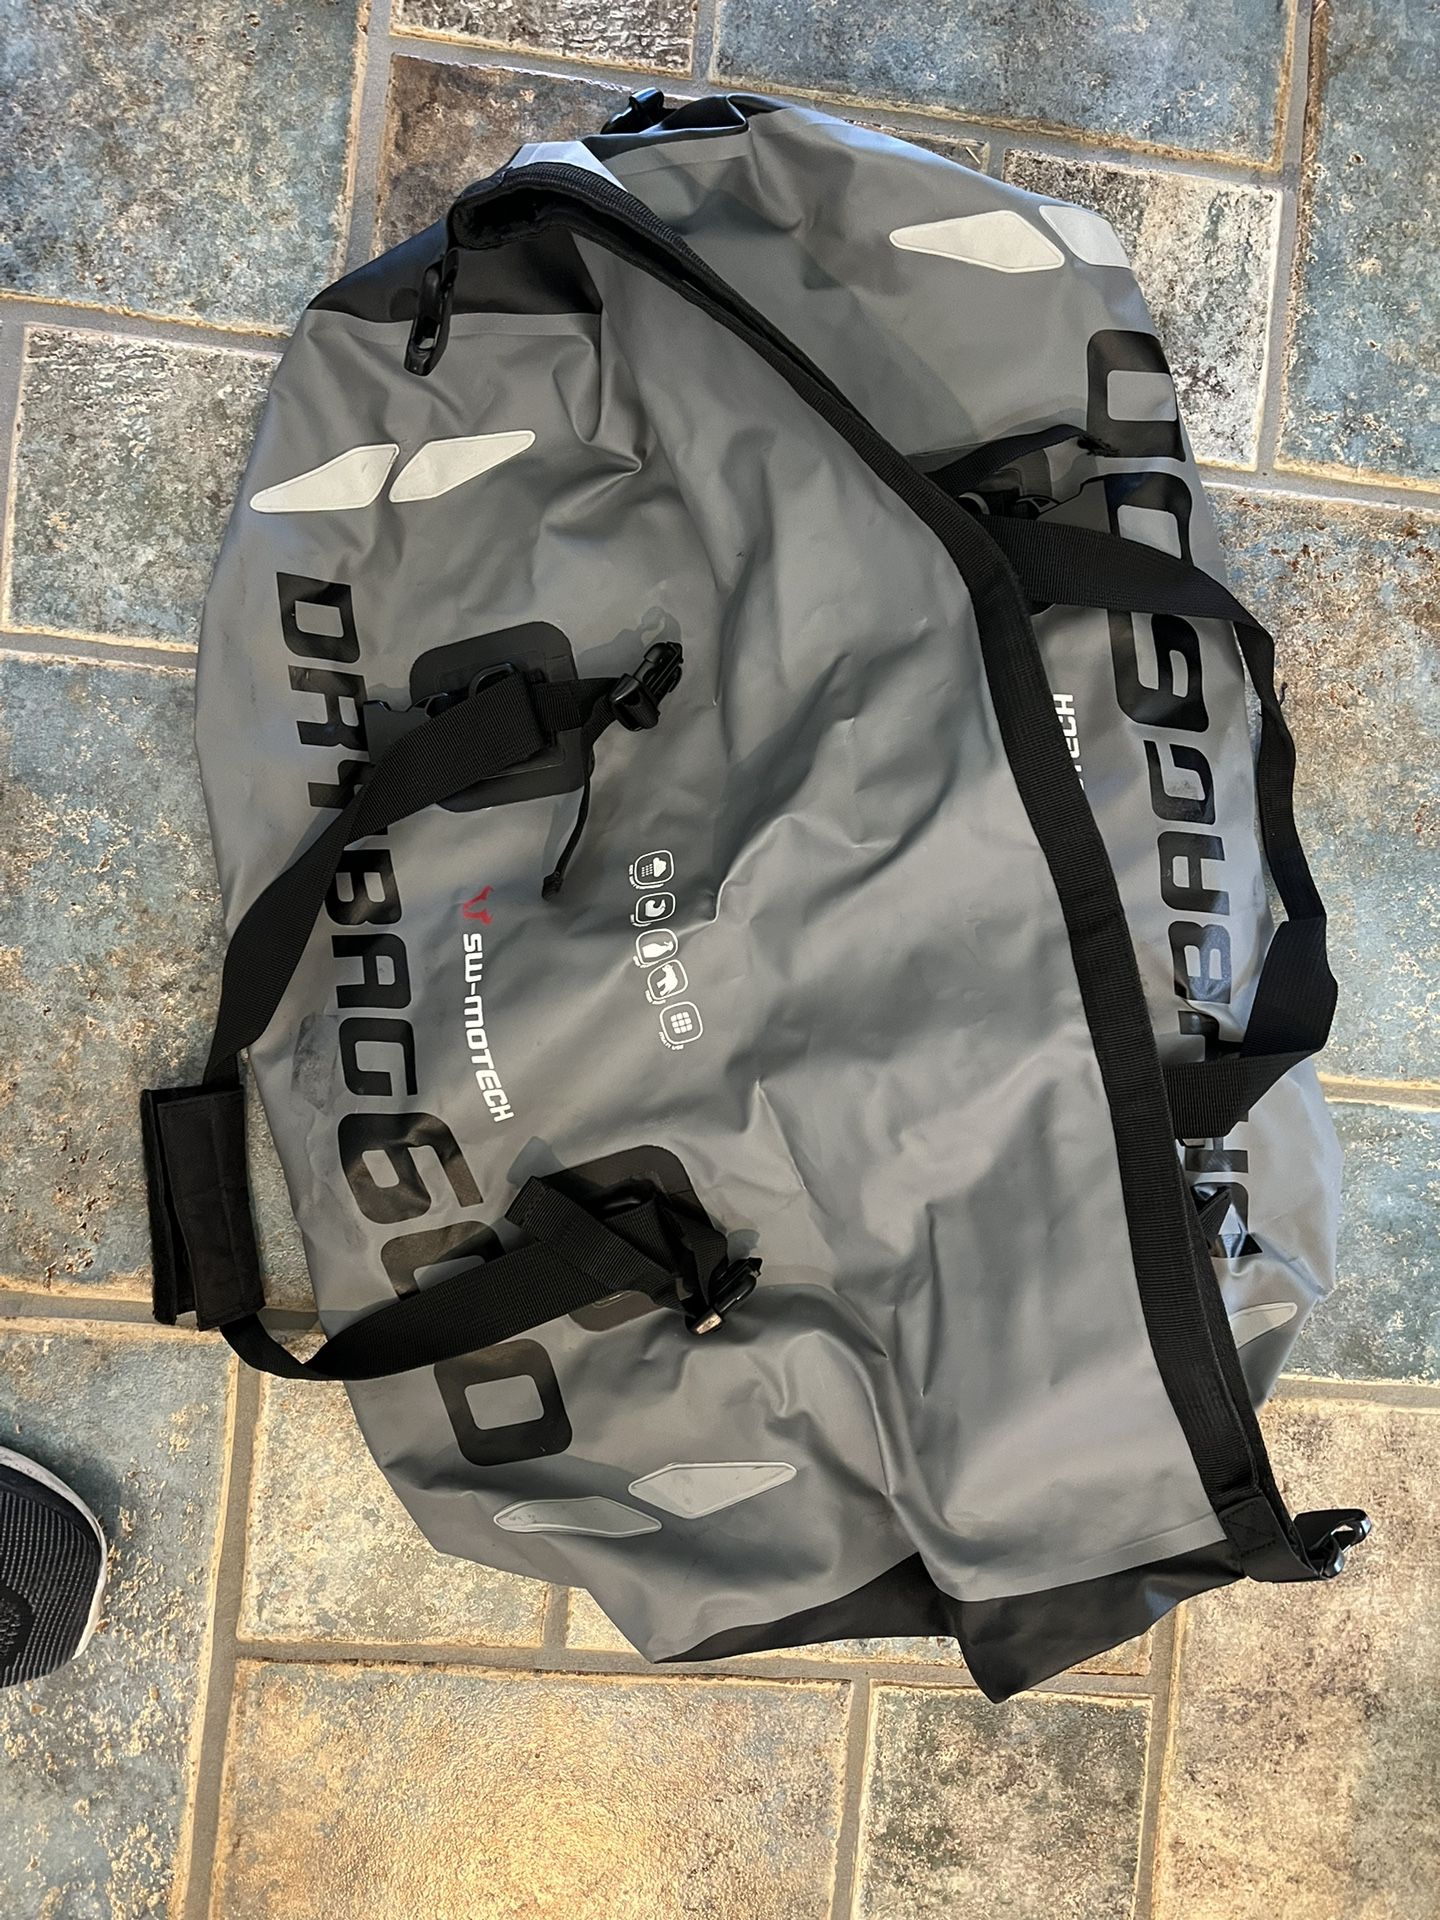 Waterproof Bag. Motorcycling Tailbag Or Just Duffle Bag For Travel